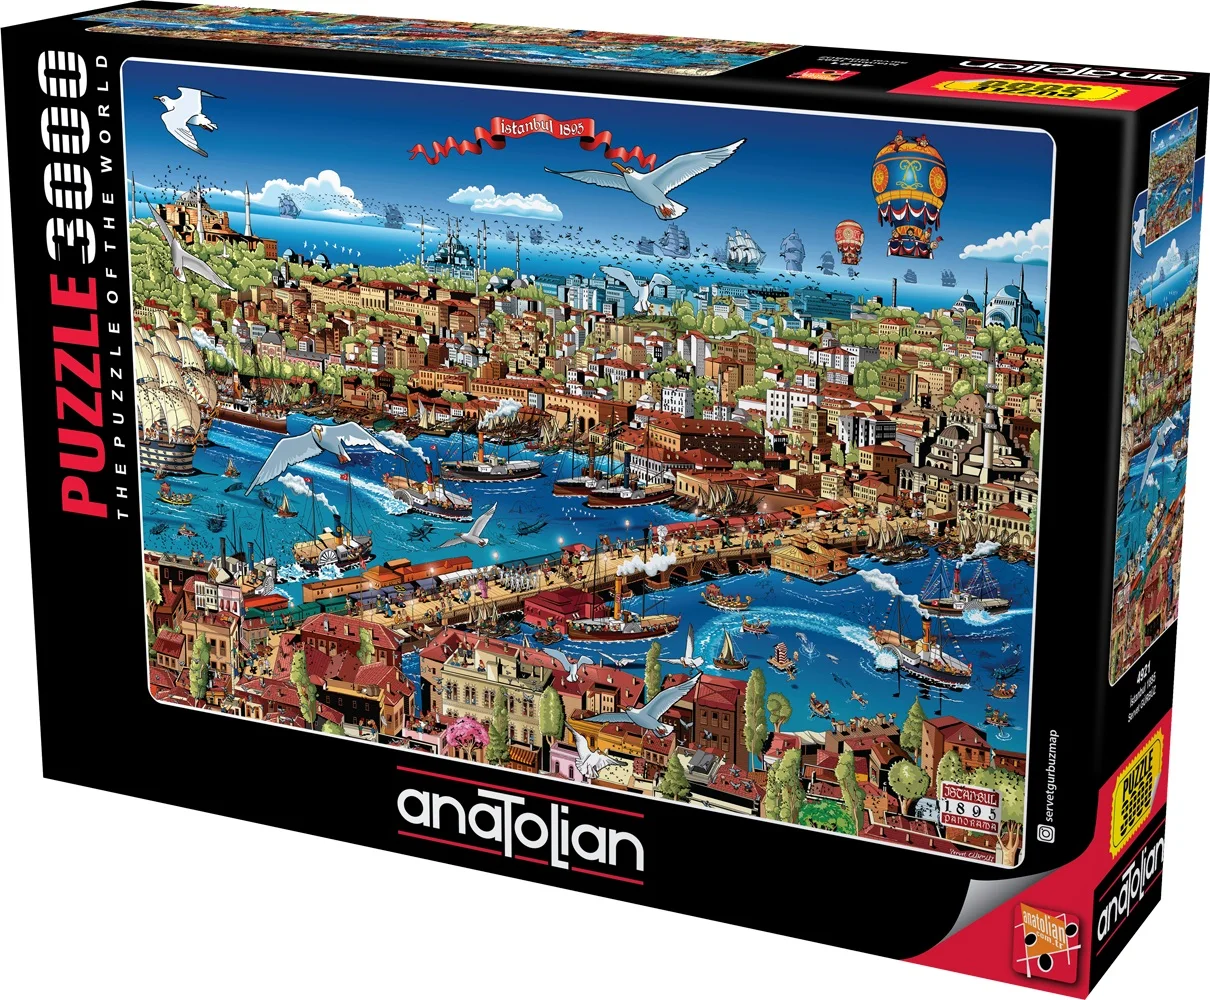 

Anatolian Puzzle Istanbul 1895 High Quality Adult Child 3000 Piece Puzzle Table Landscape Educational Game Toy Gift 120x85